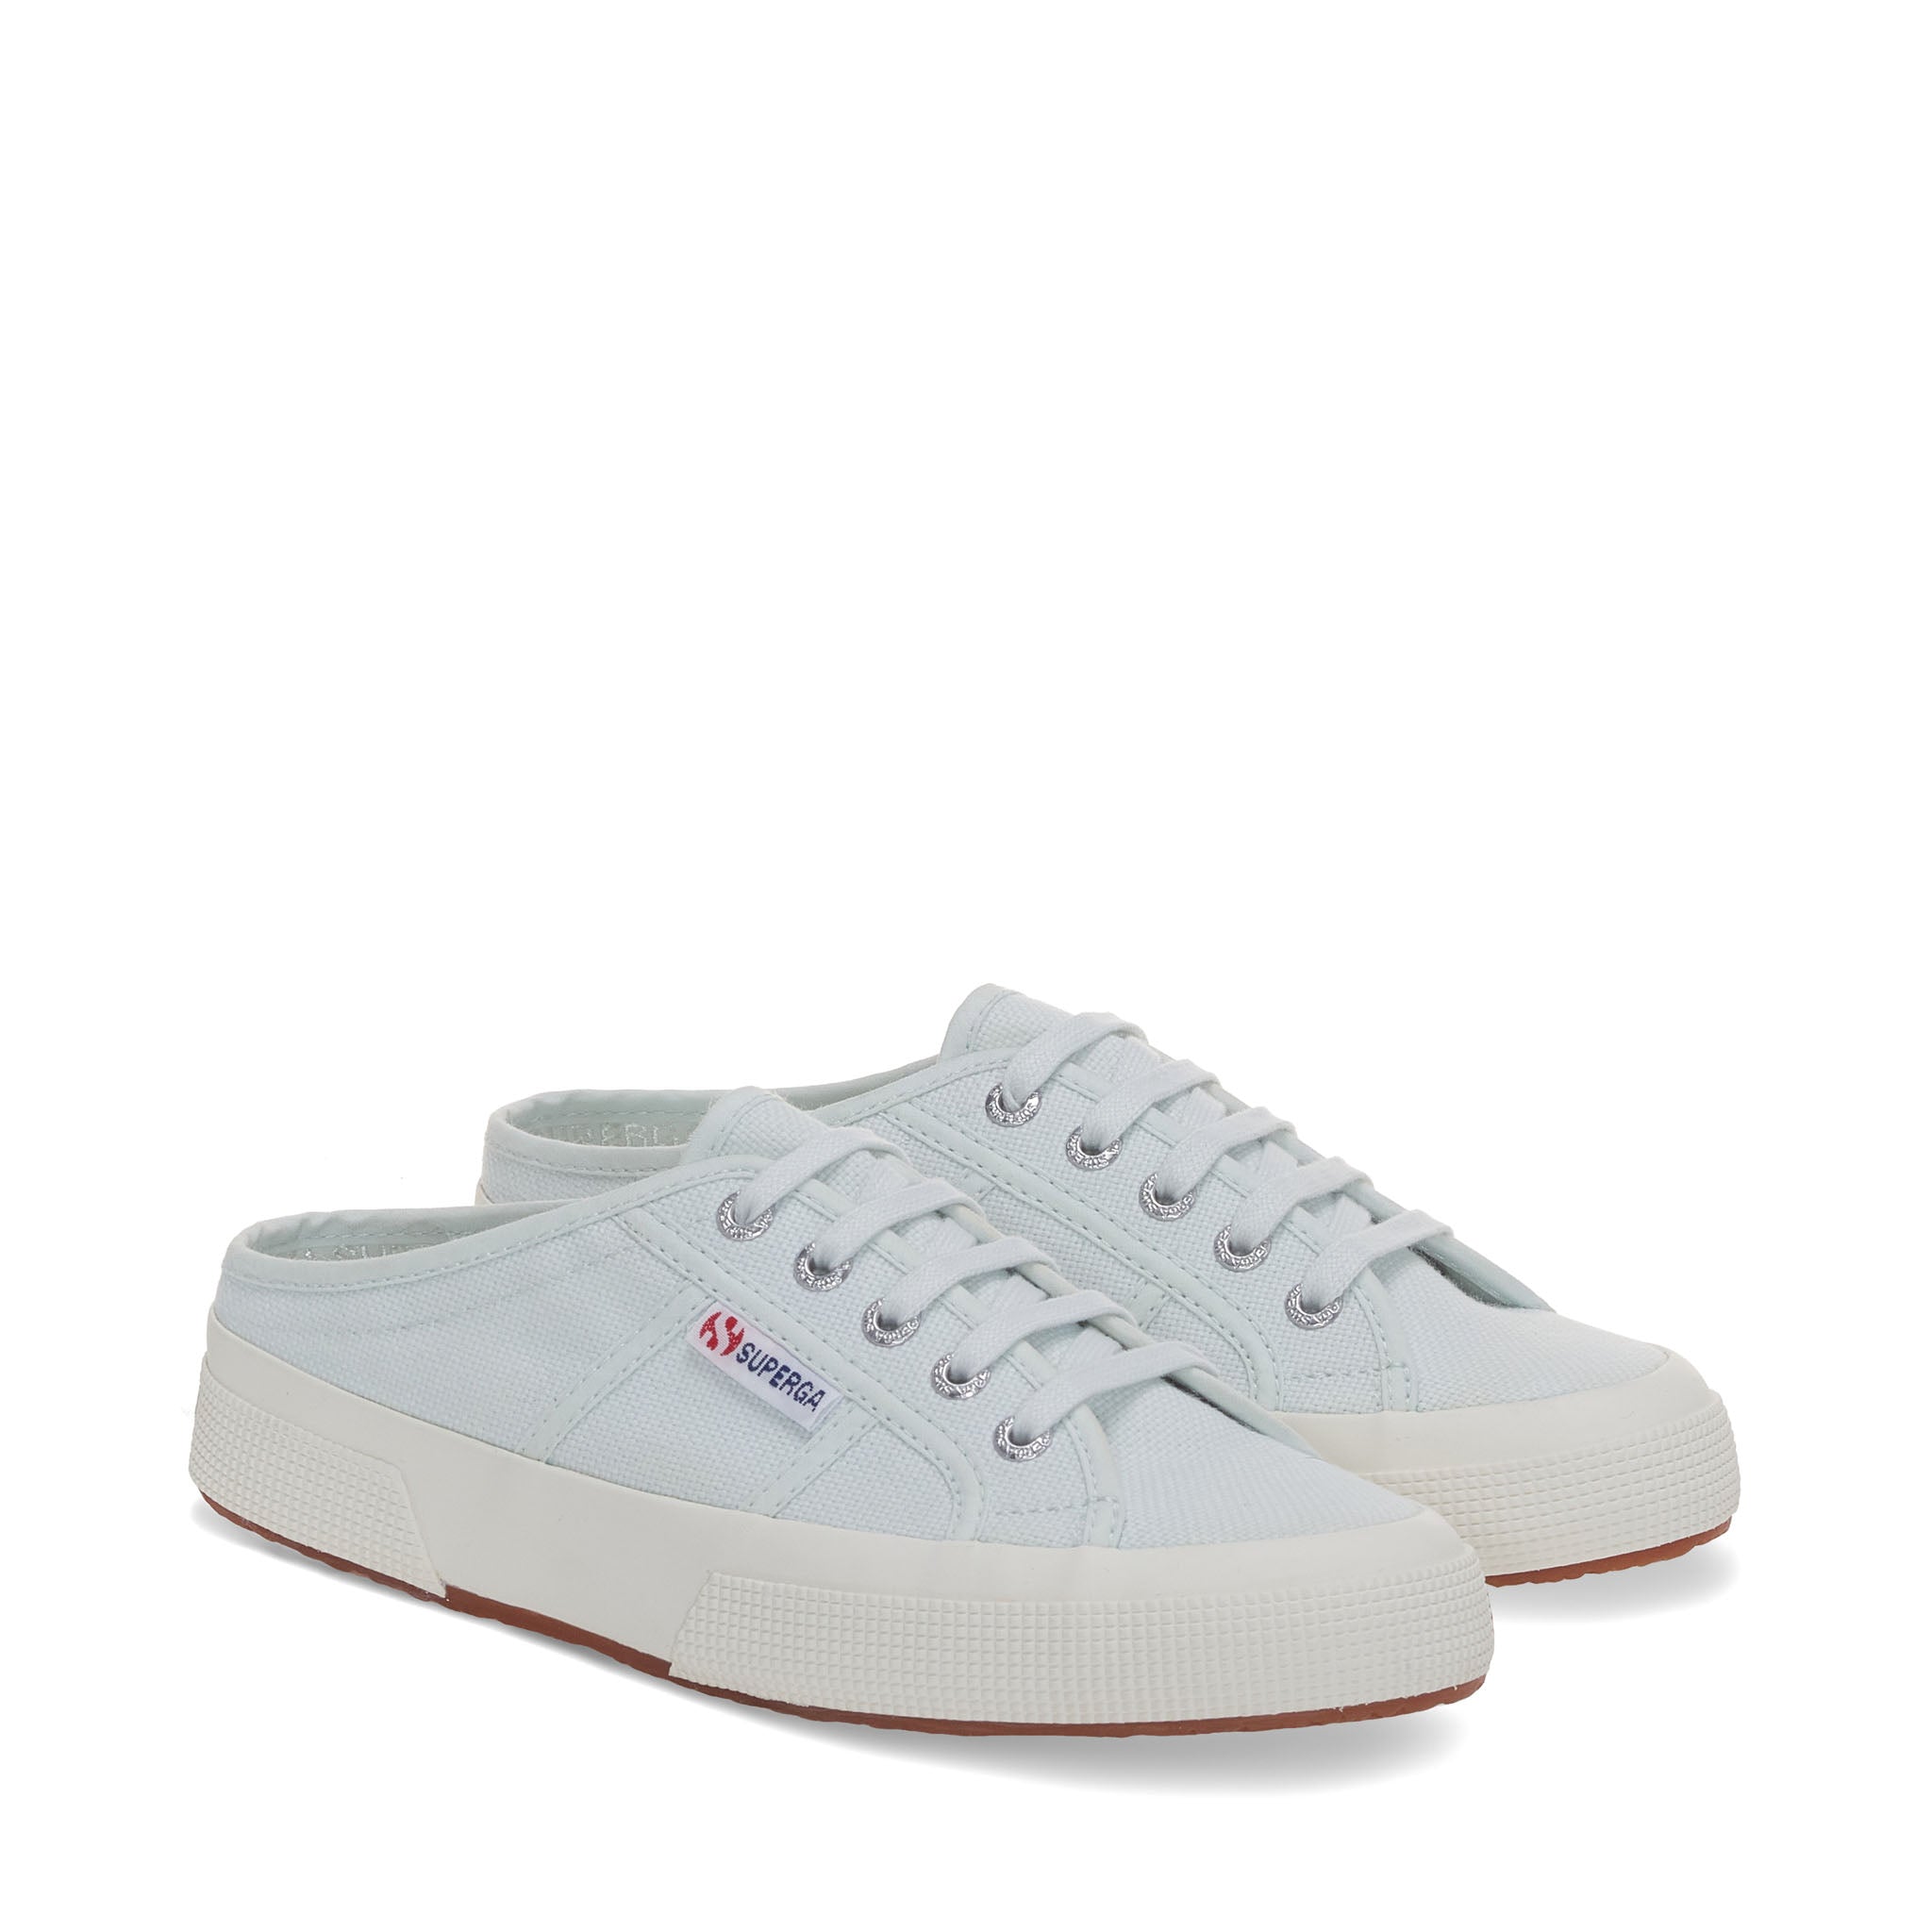 Superga 2402 Mule Sneakers - Light Blue. Front view.